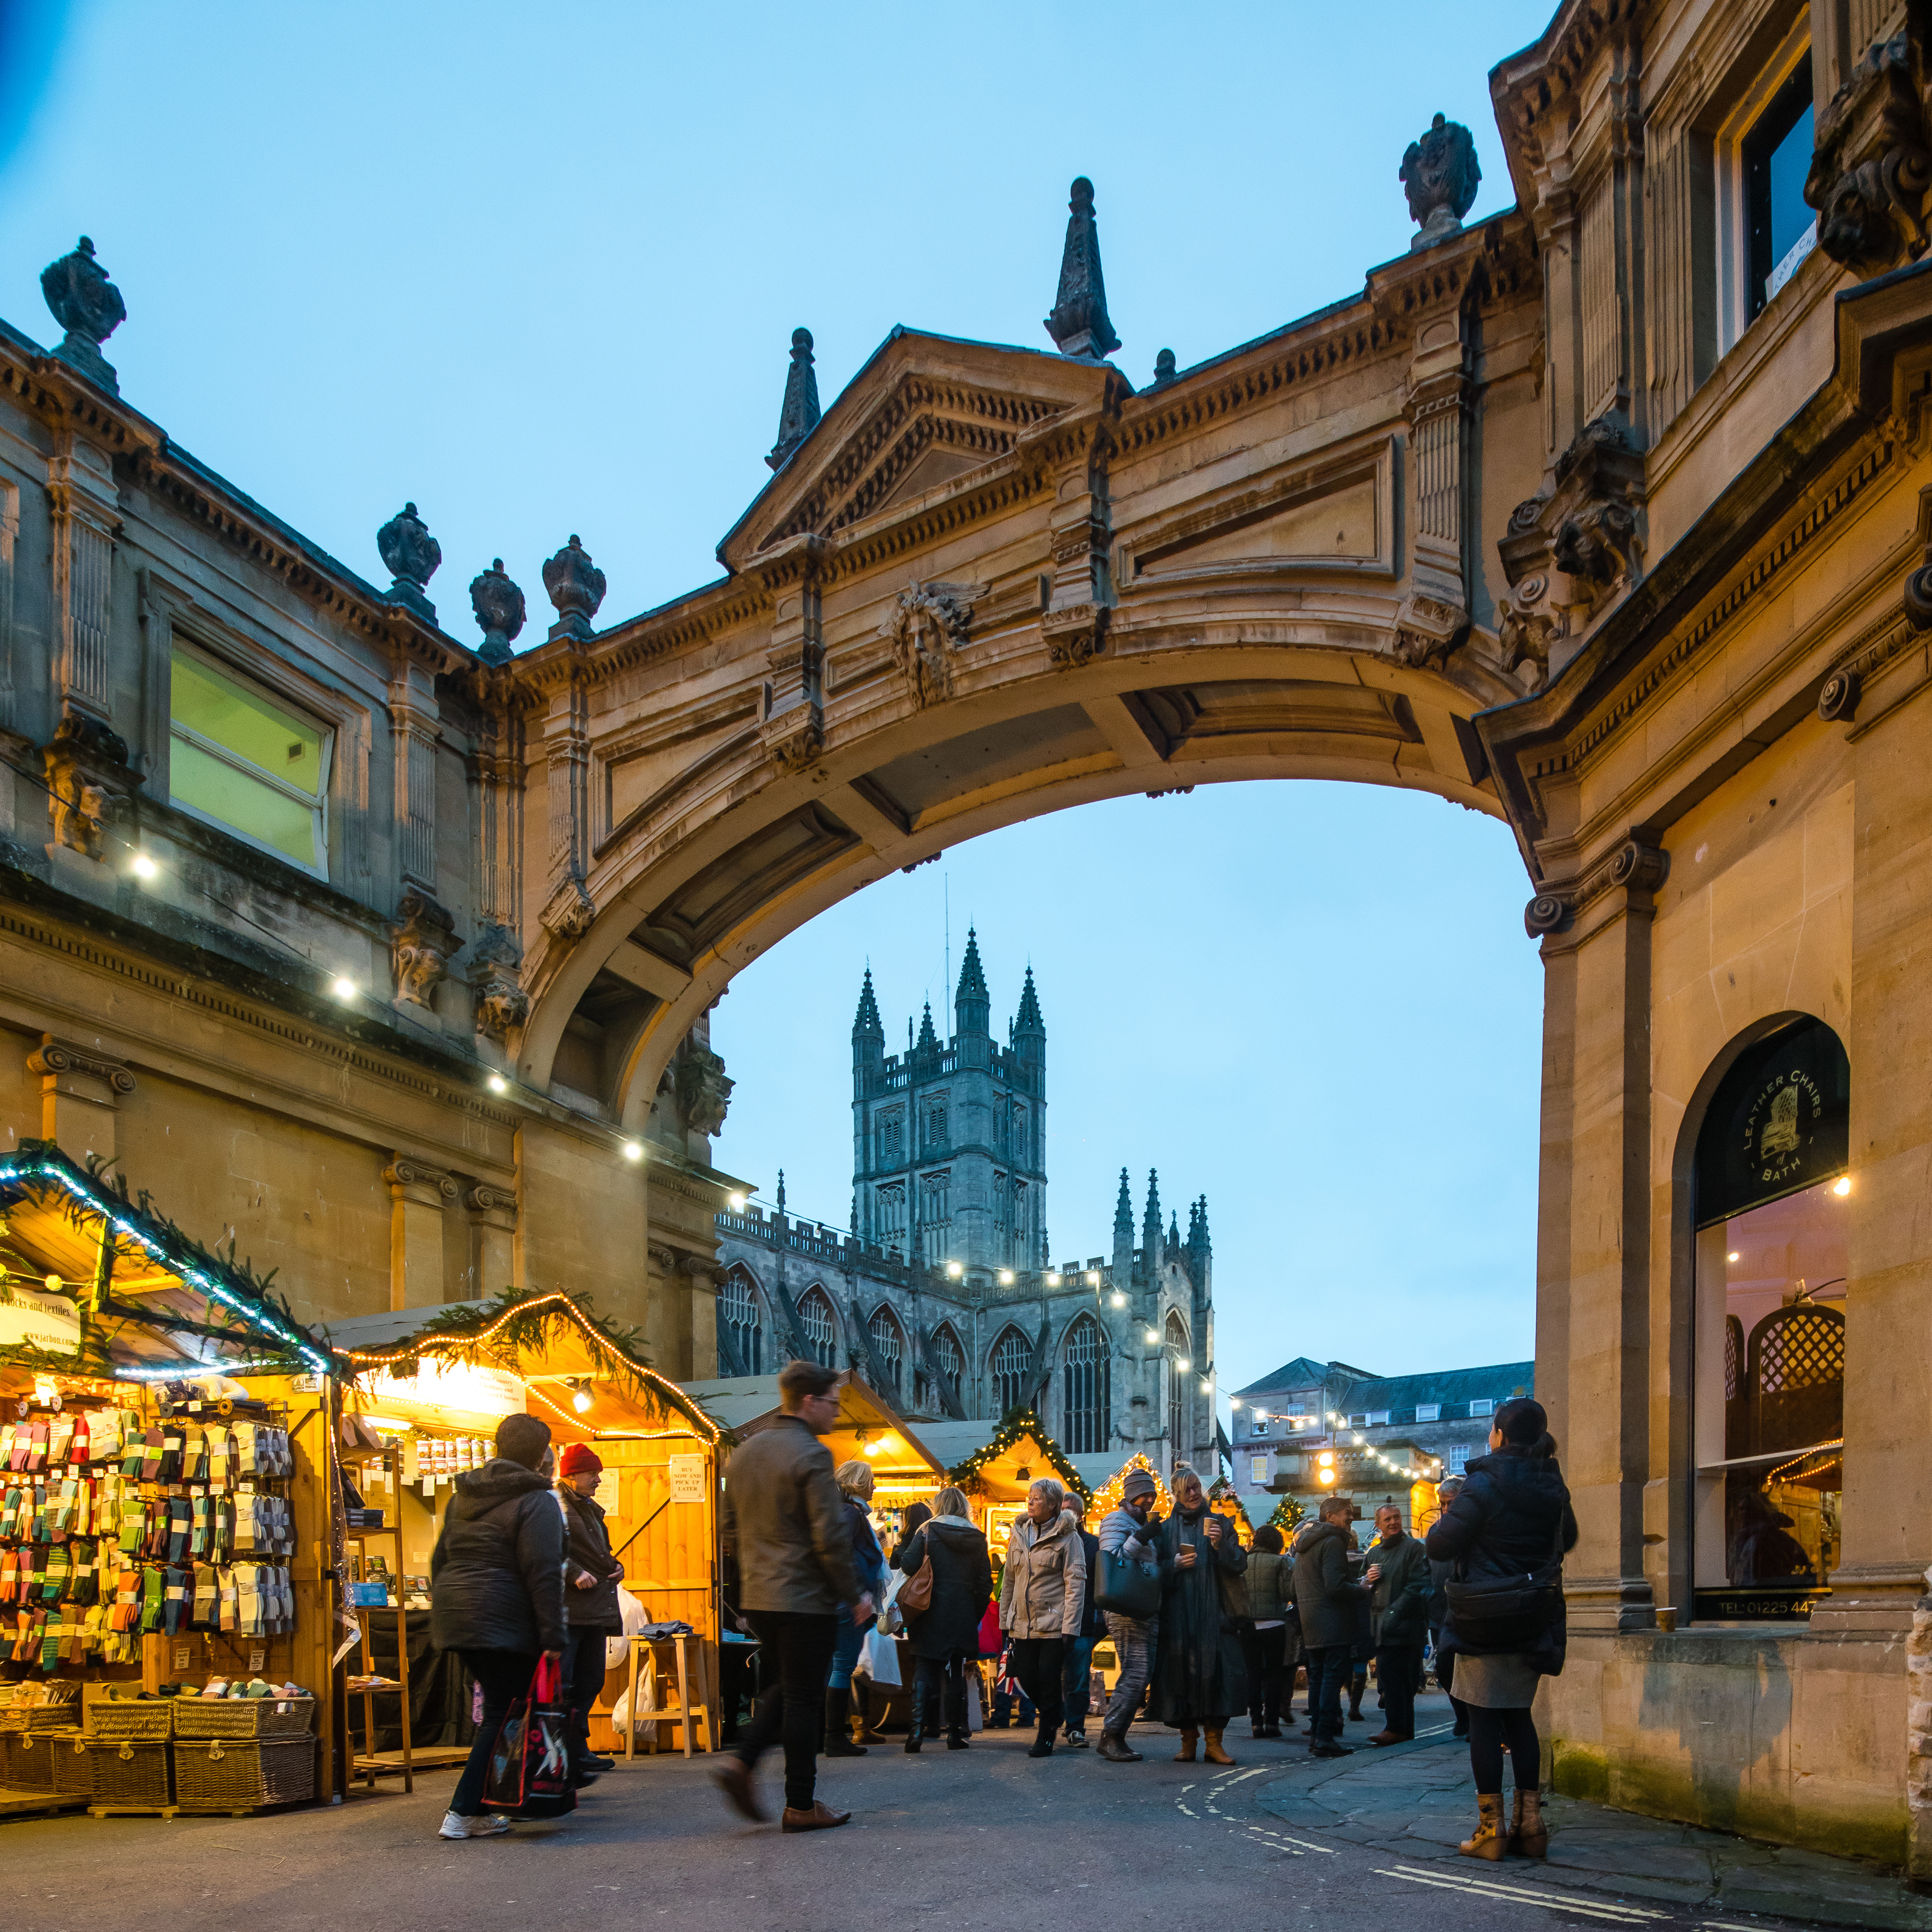 Christmas market stalls line York St in Bath with Bath Abbey in the background